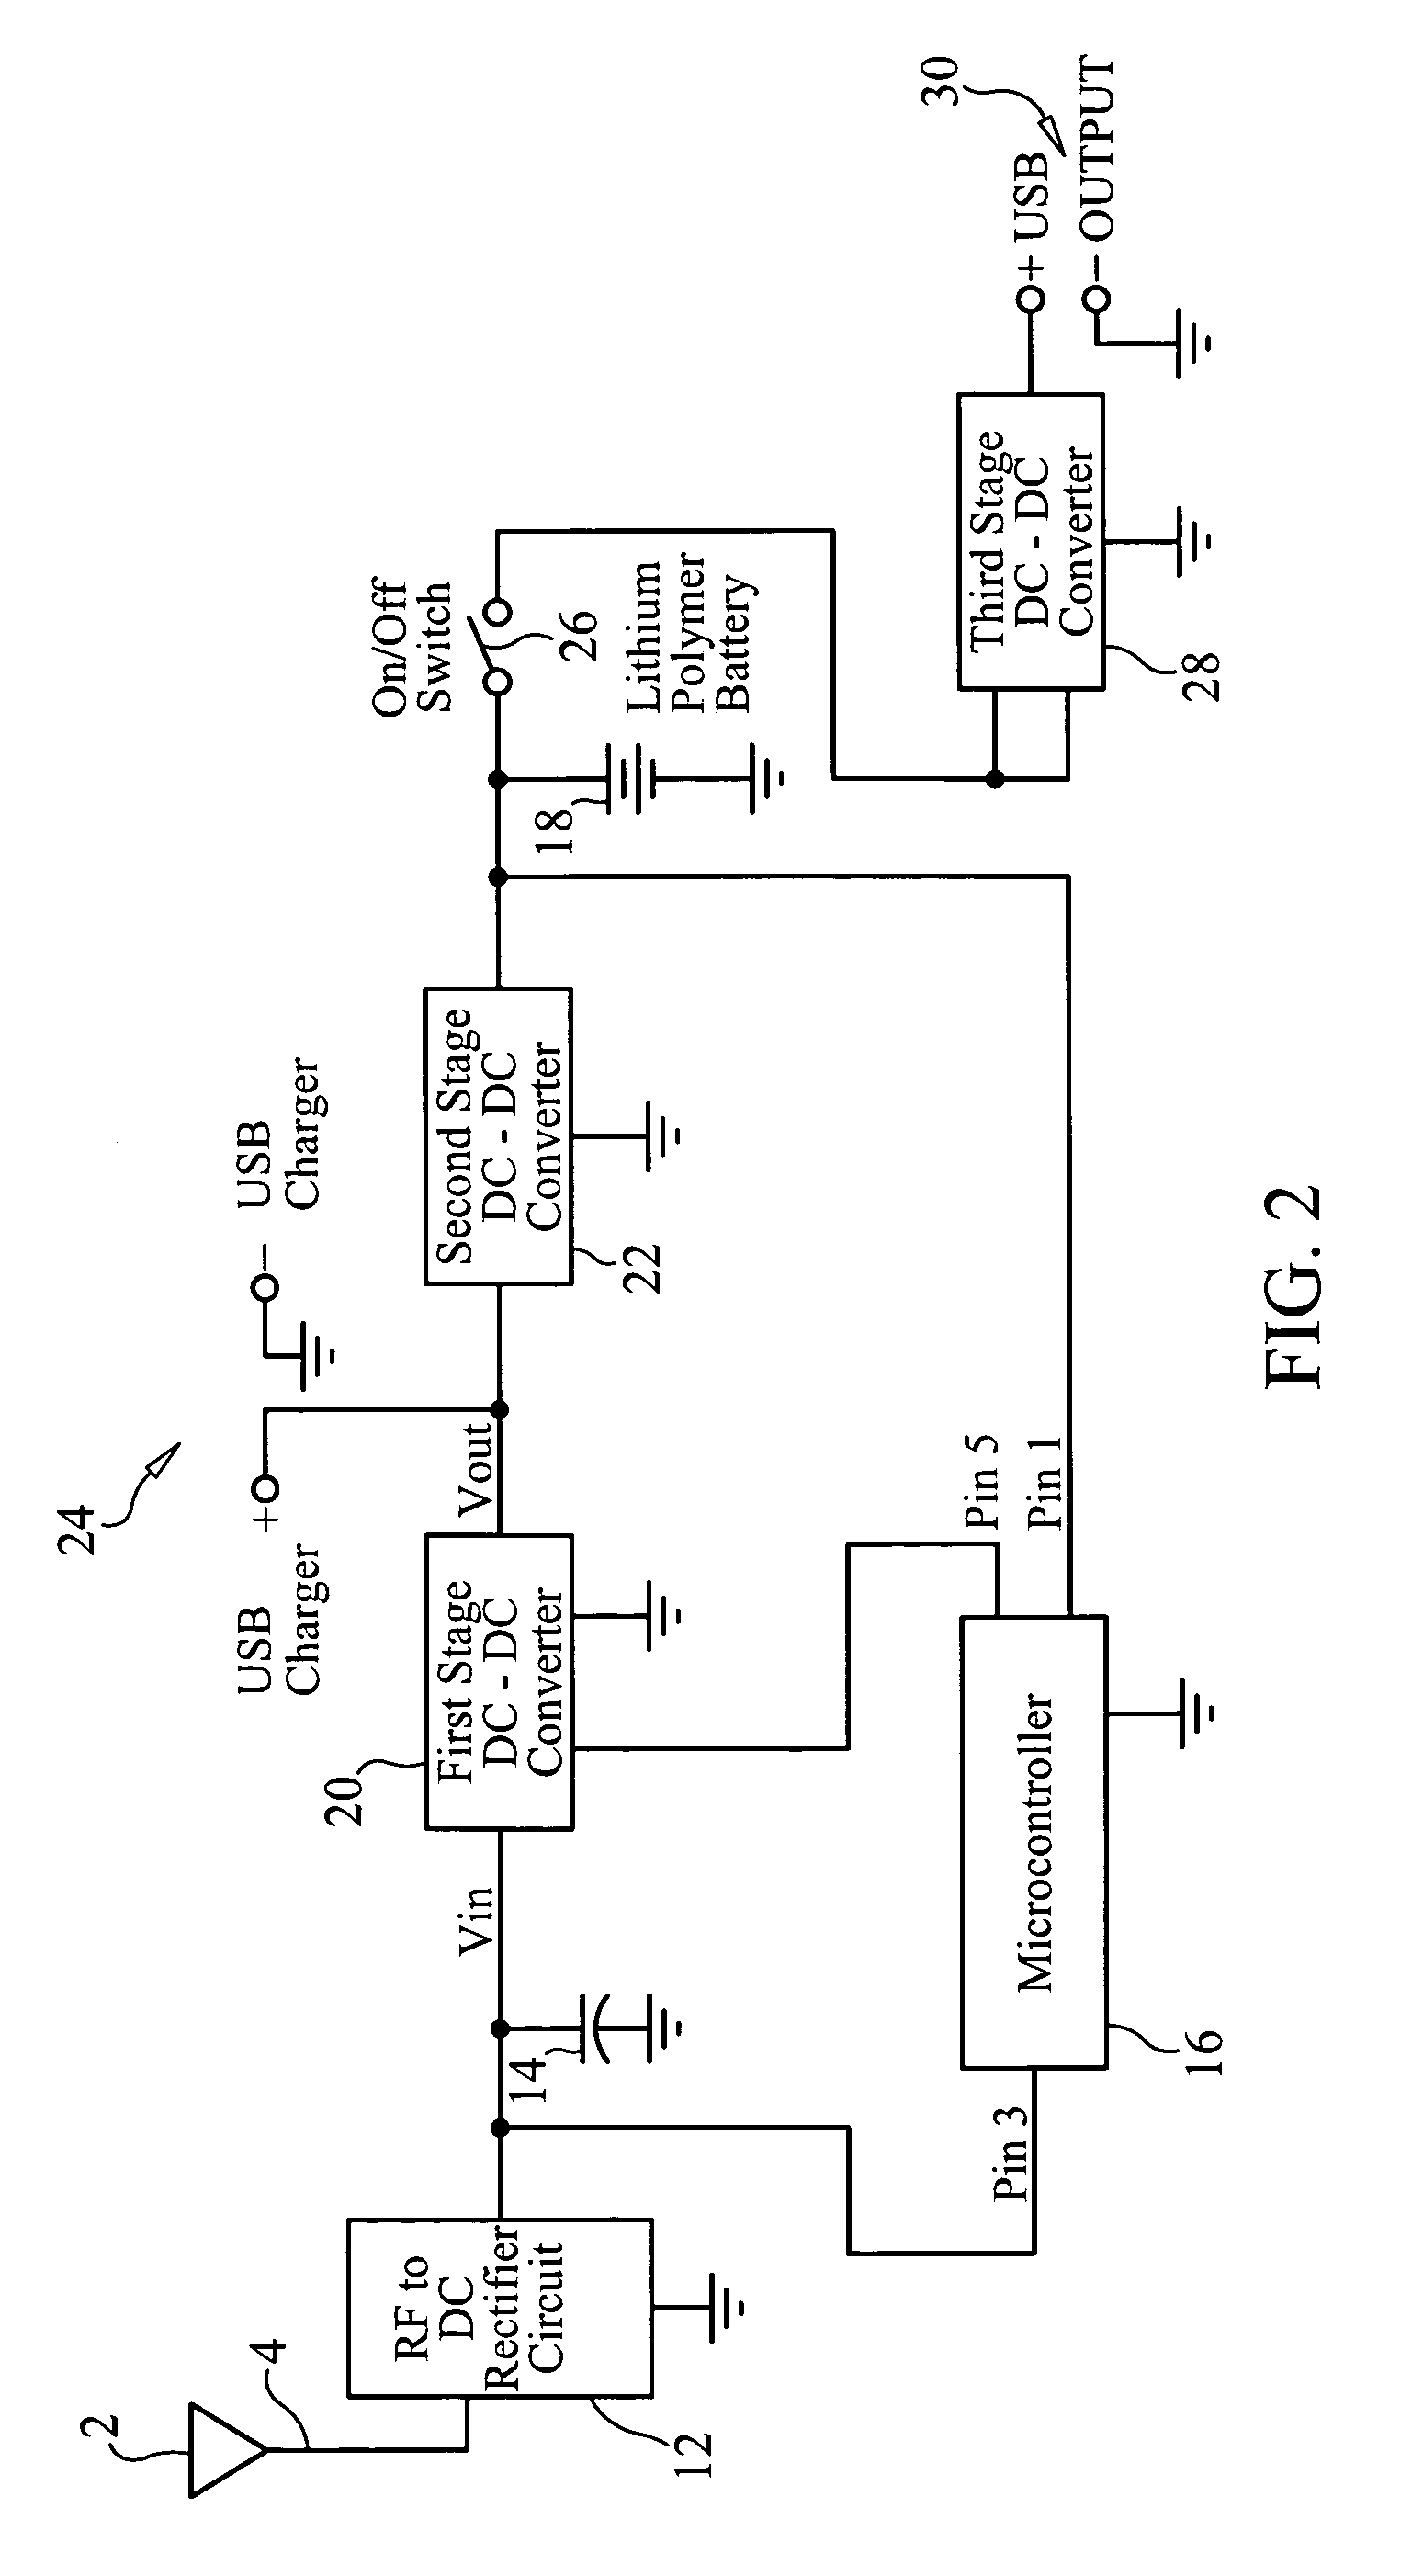 Method and apparatus for harvesting energy